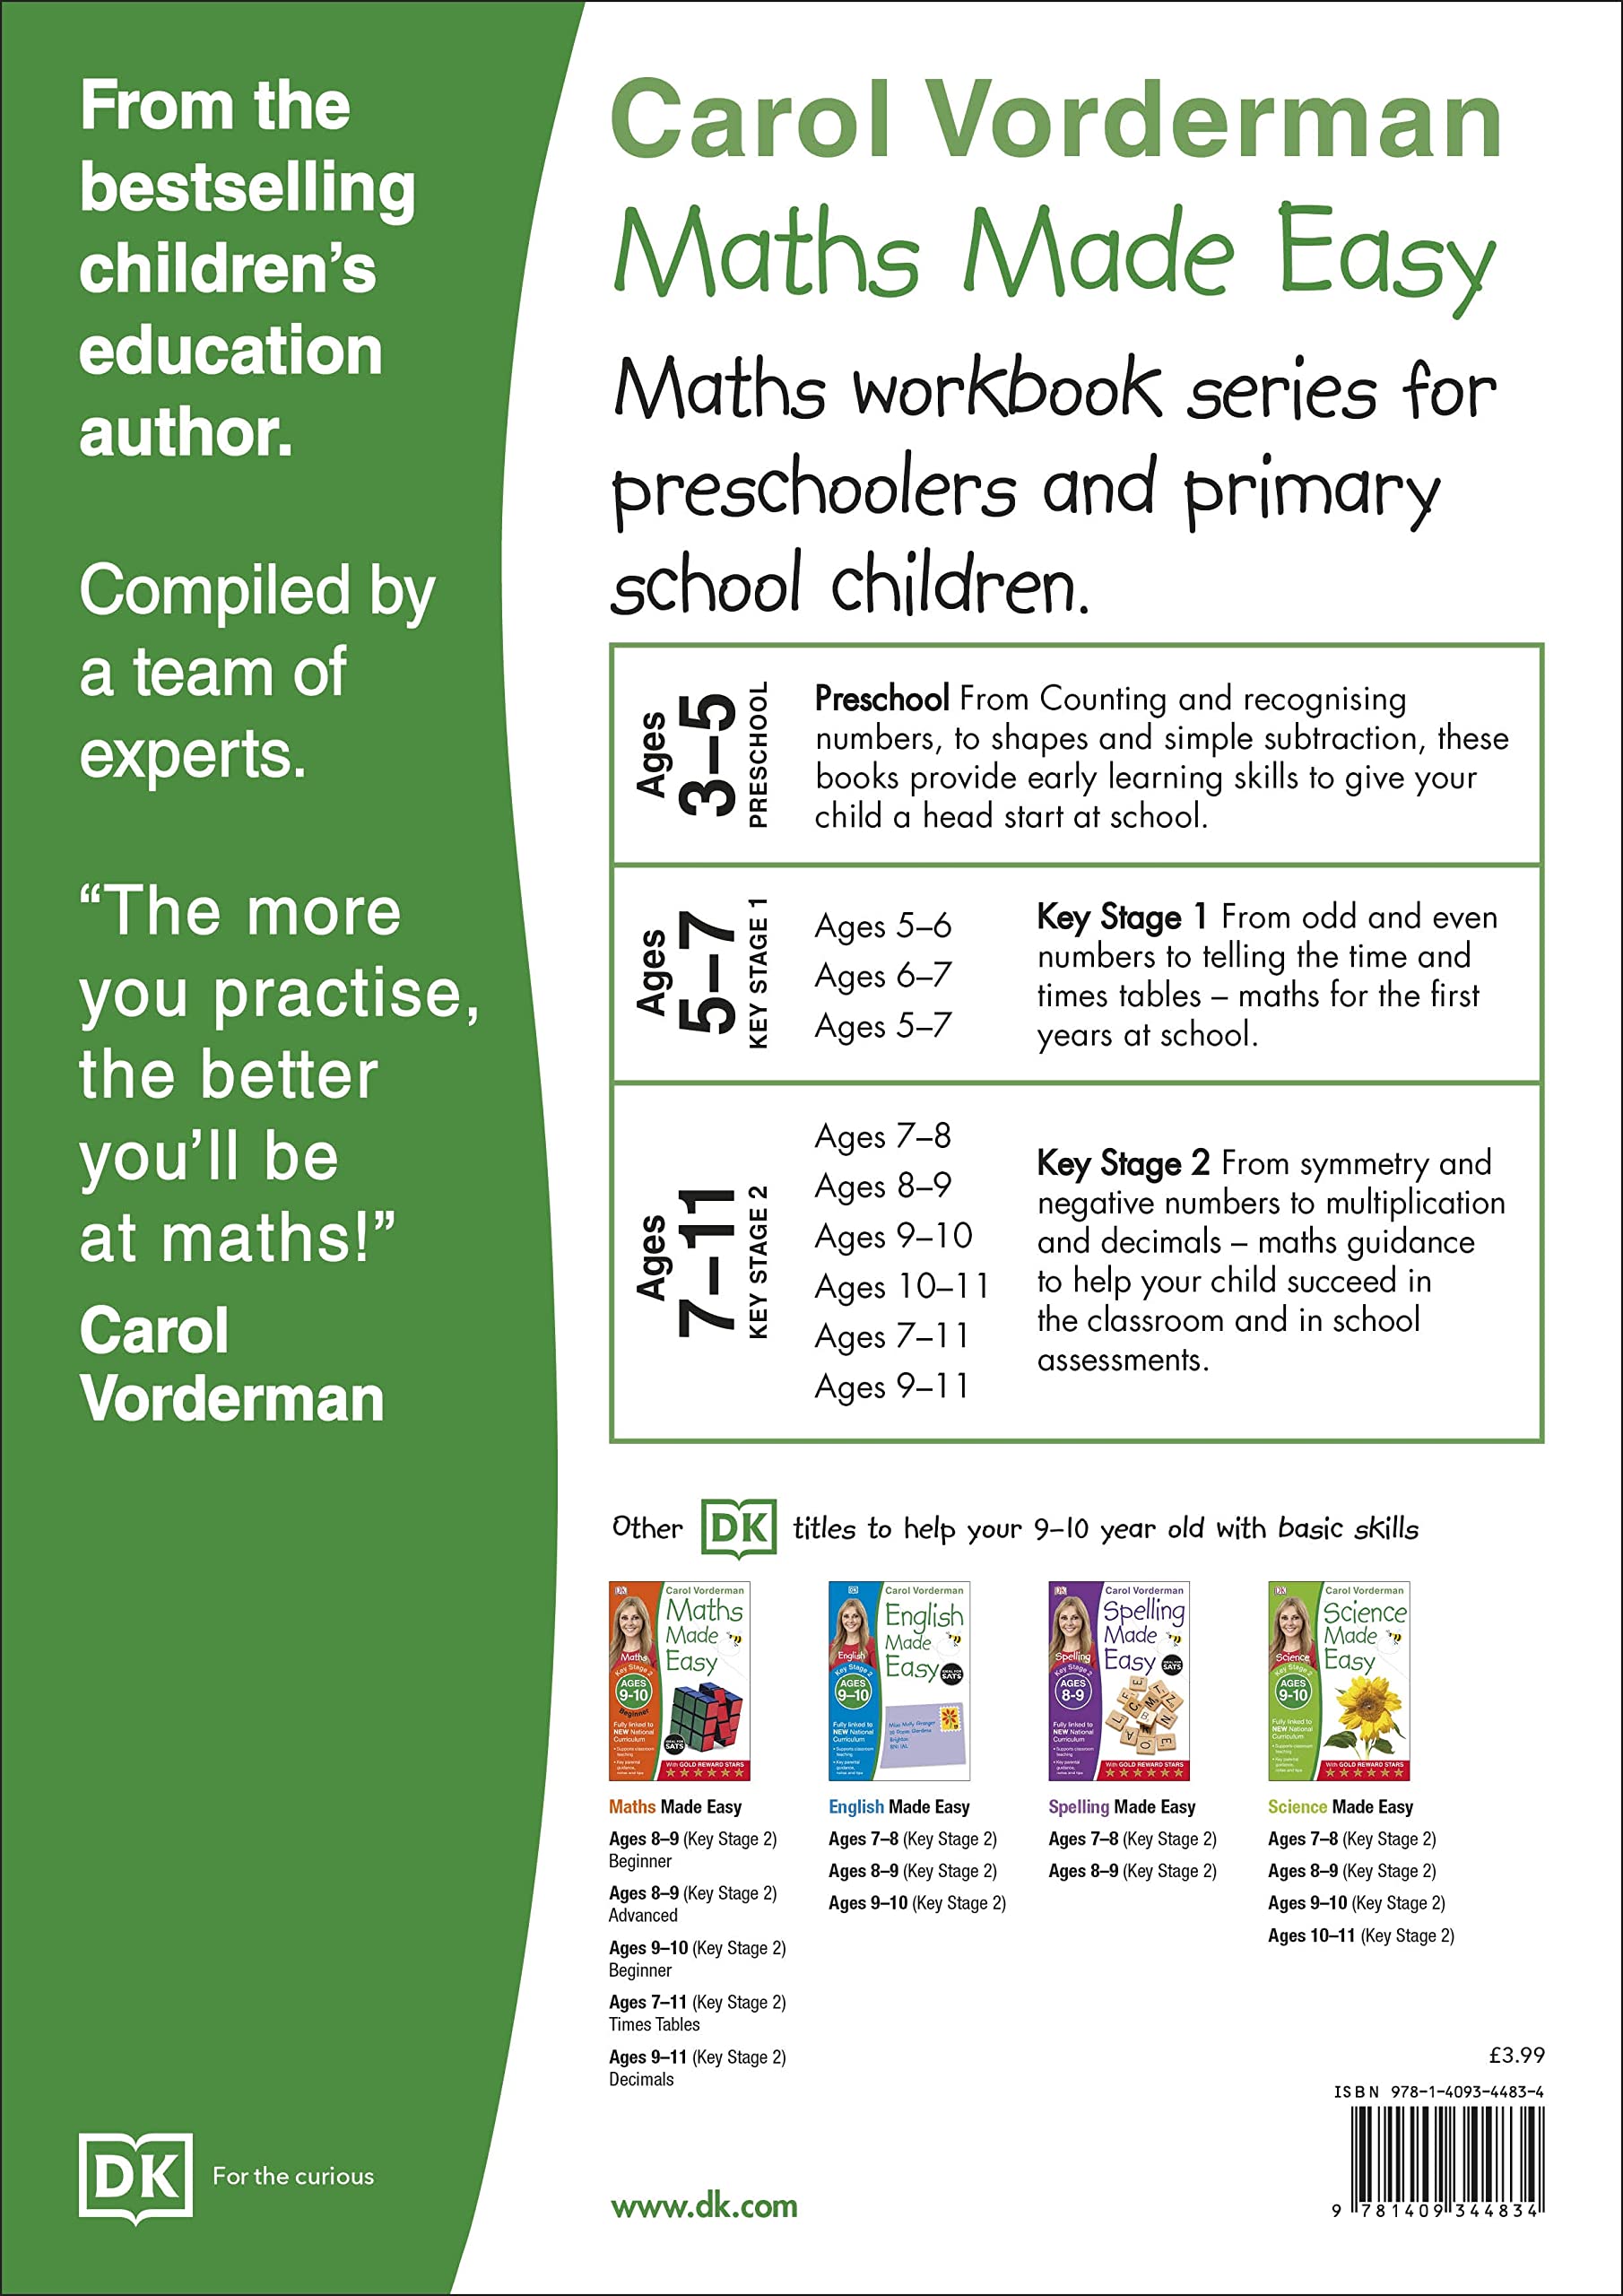 Maths Made Easy: Advanced, Ages 9-10 (Key Stage 2)